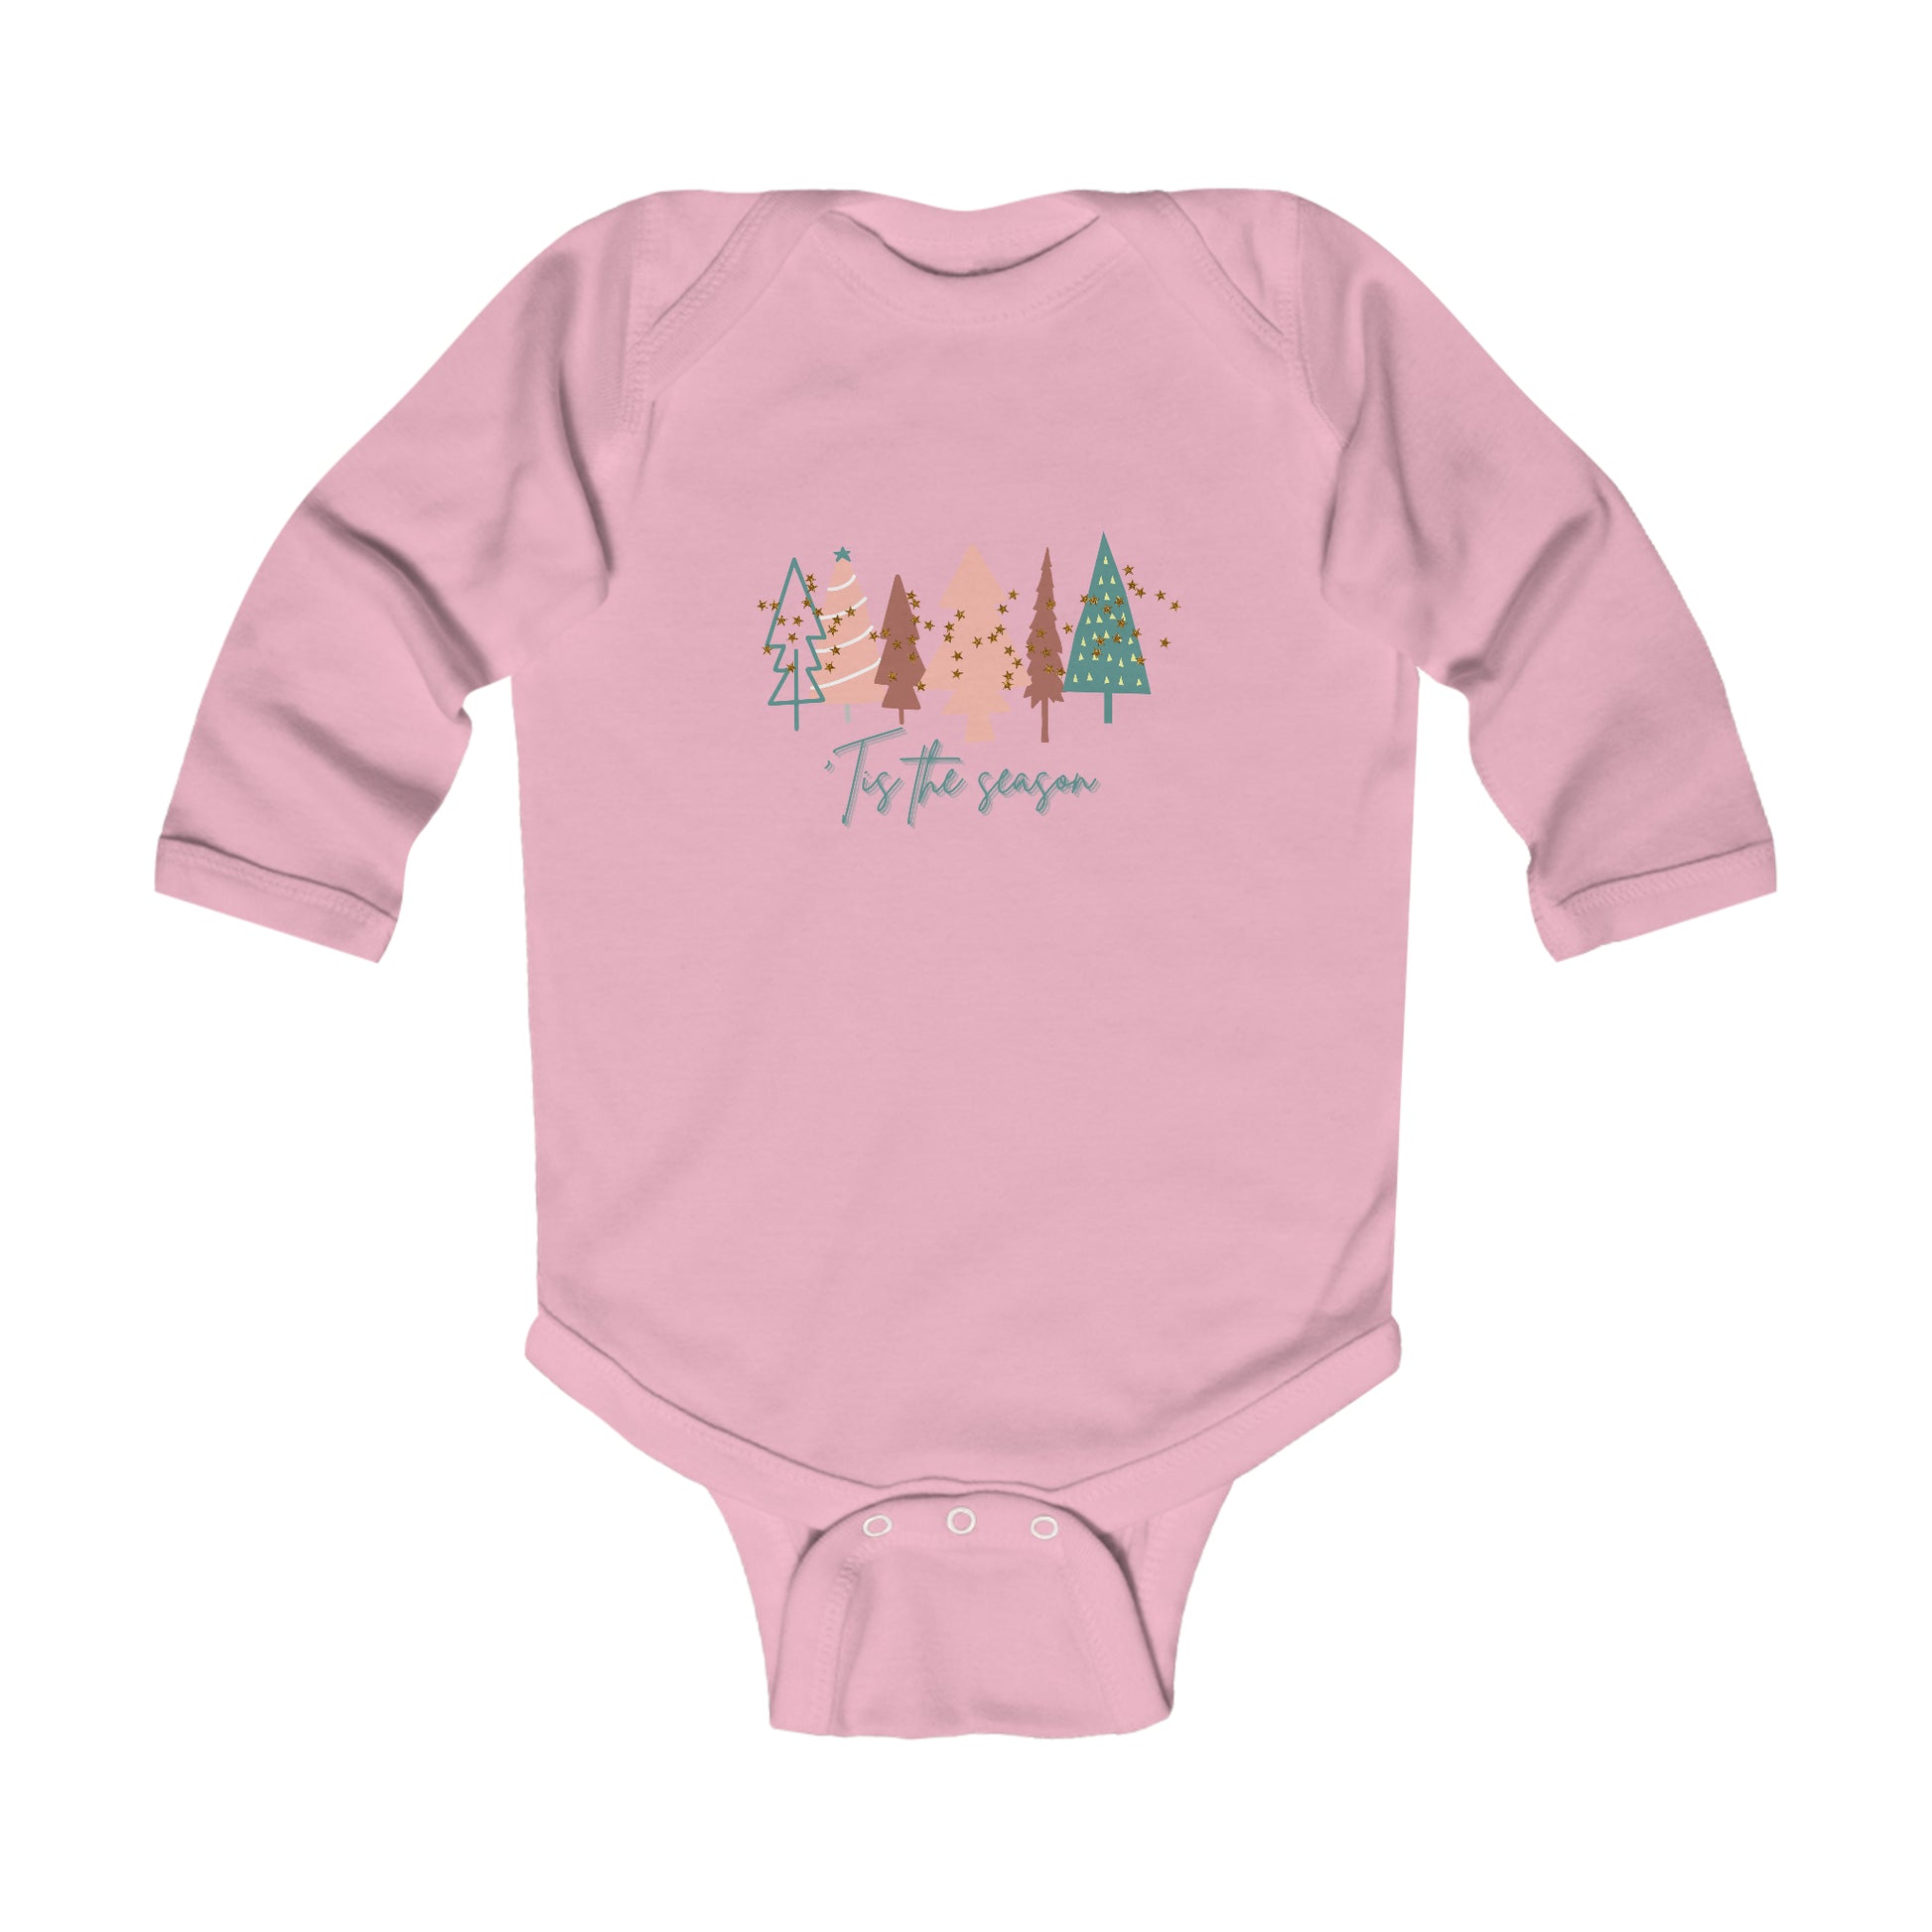 An adorable pink long sleeve Christmas Tree Infant Long Sleeve Bodysuit adorned with a festive Christmas tree to celebrate your infant's first Christmas from Printify.